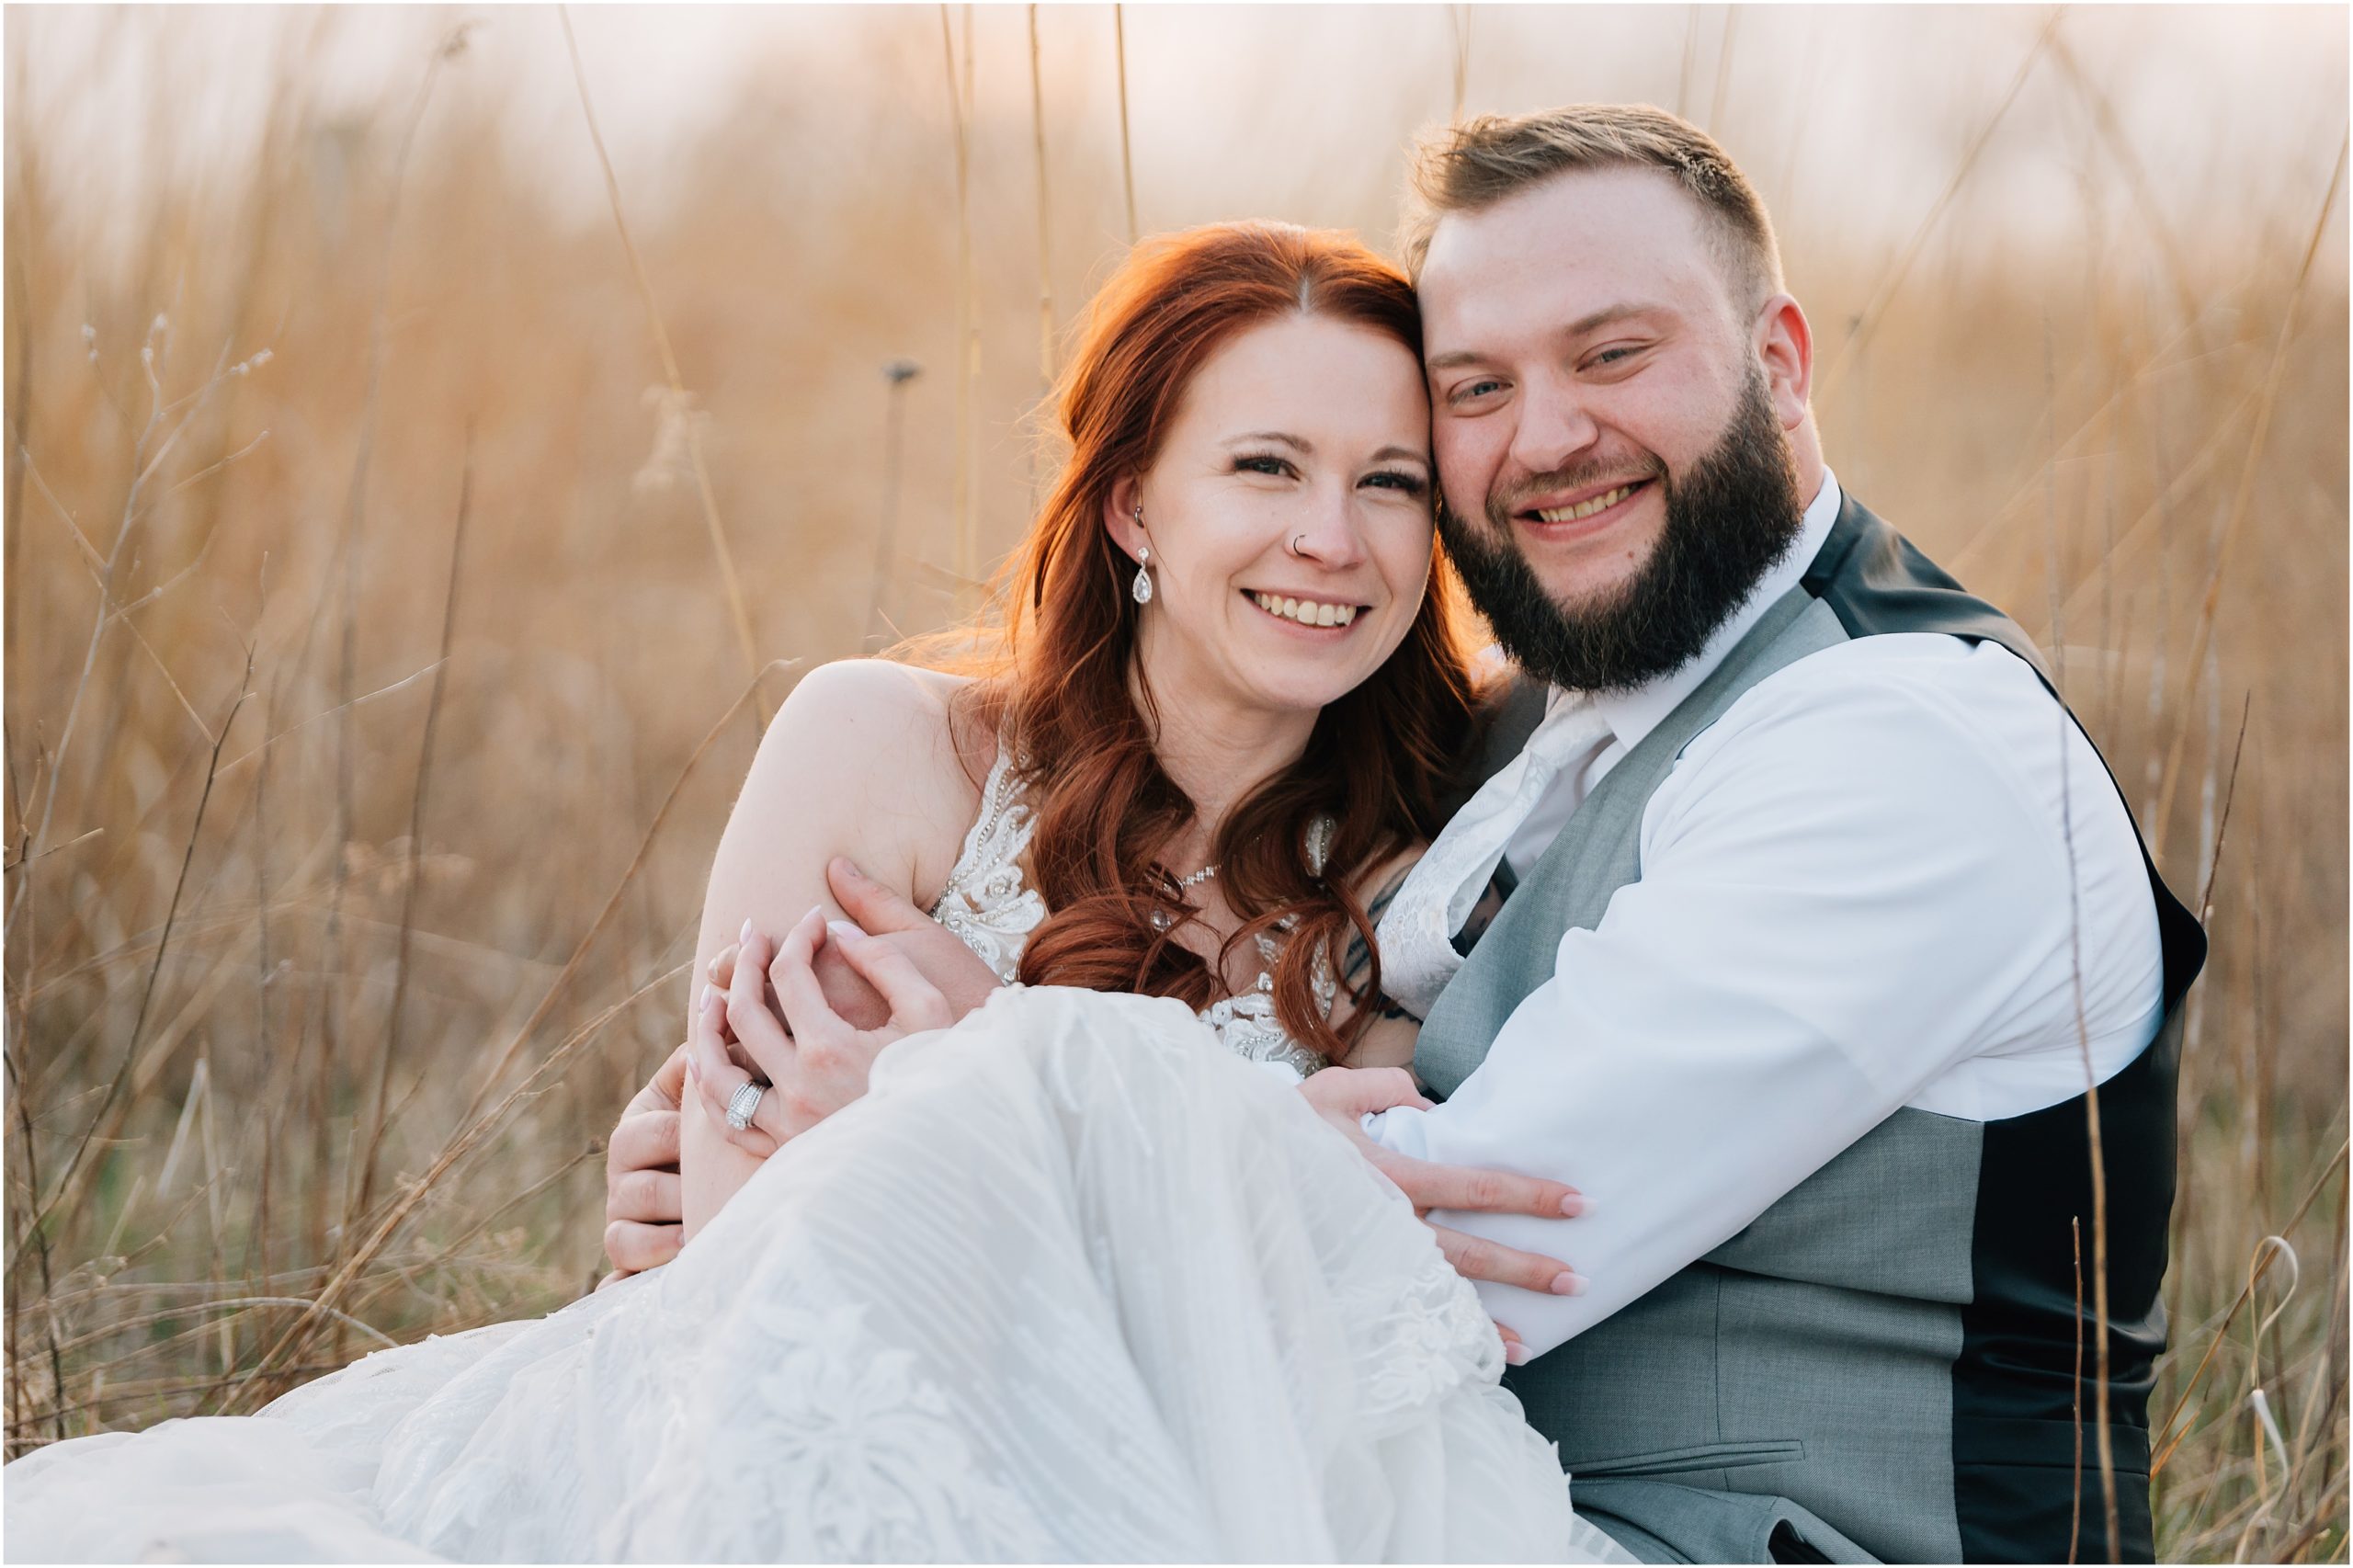 Couple sits in a field and smiles at the camera at Honey Creek Resort on Rathbun Lake. Photo is by Anna Brace who specializes in Omaha Wedding Photography